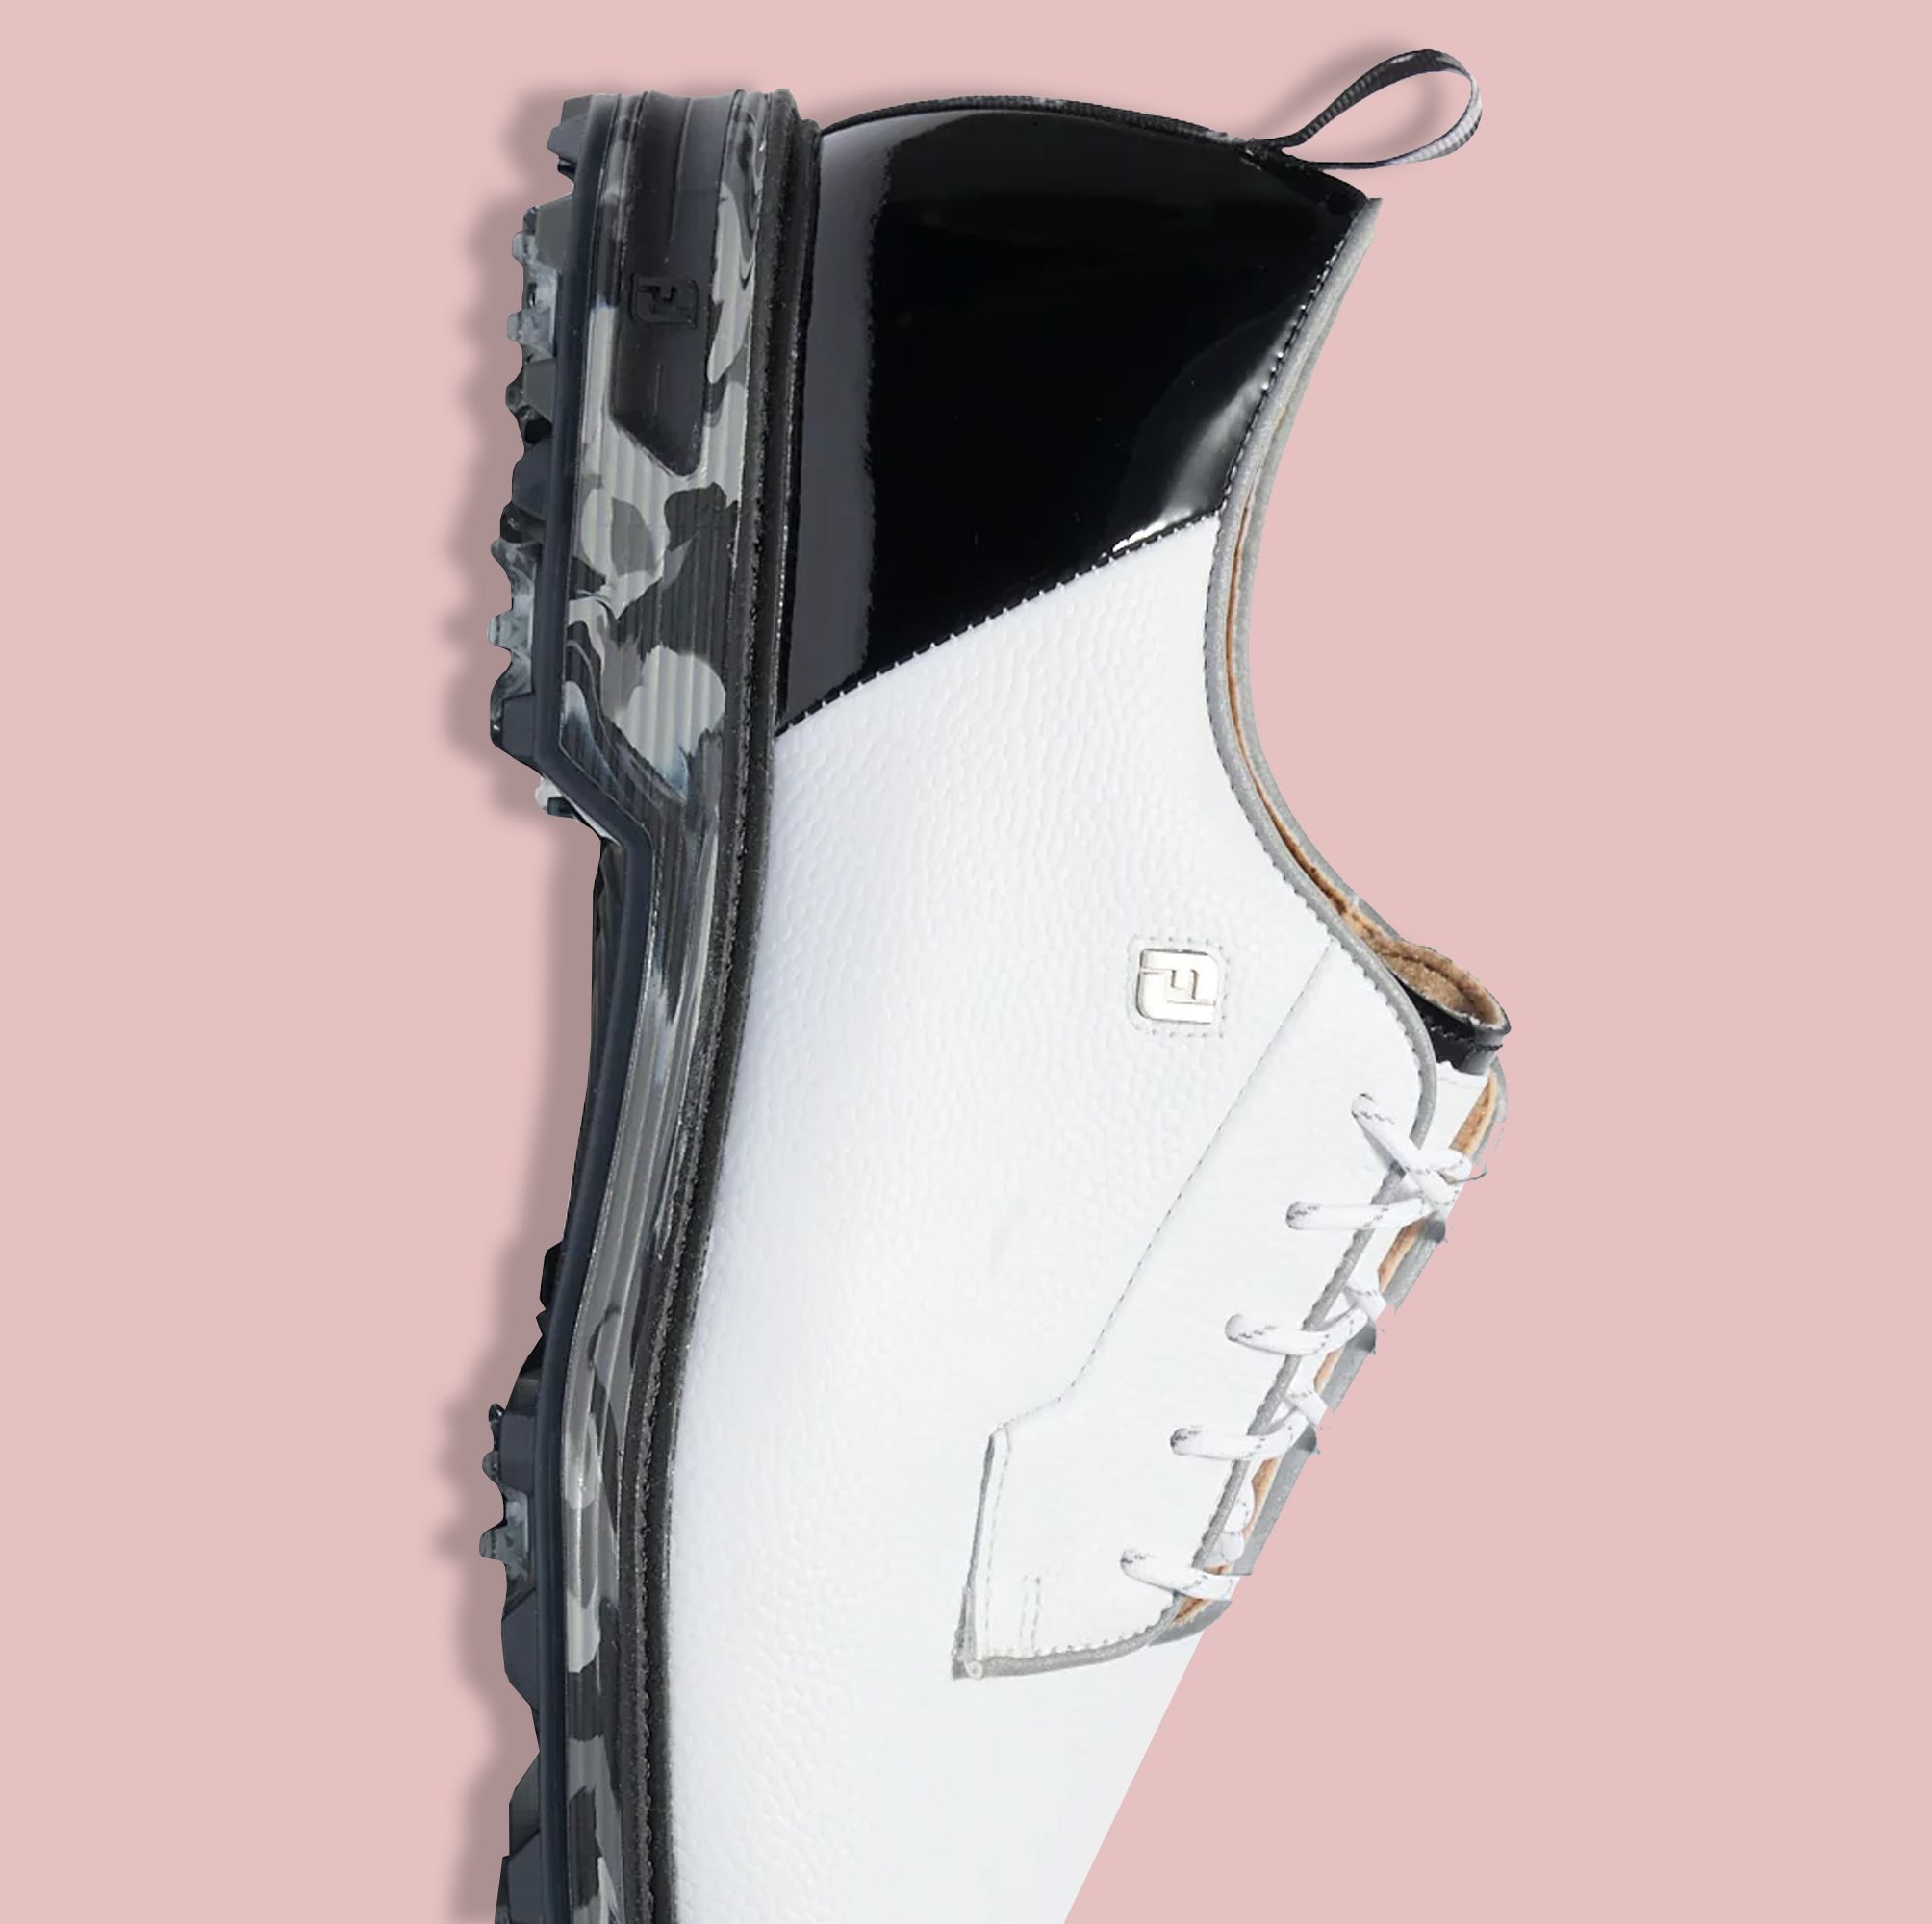 23 Golf Shoes for Sneakerheads, Traditionalists, and Everything In Between